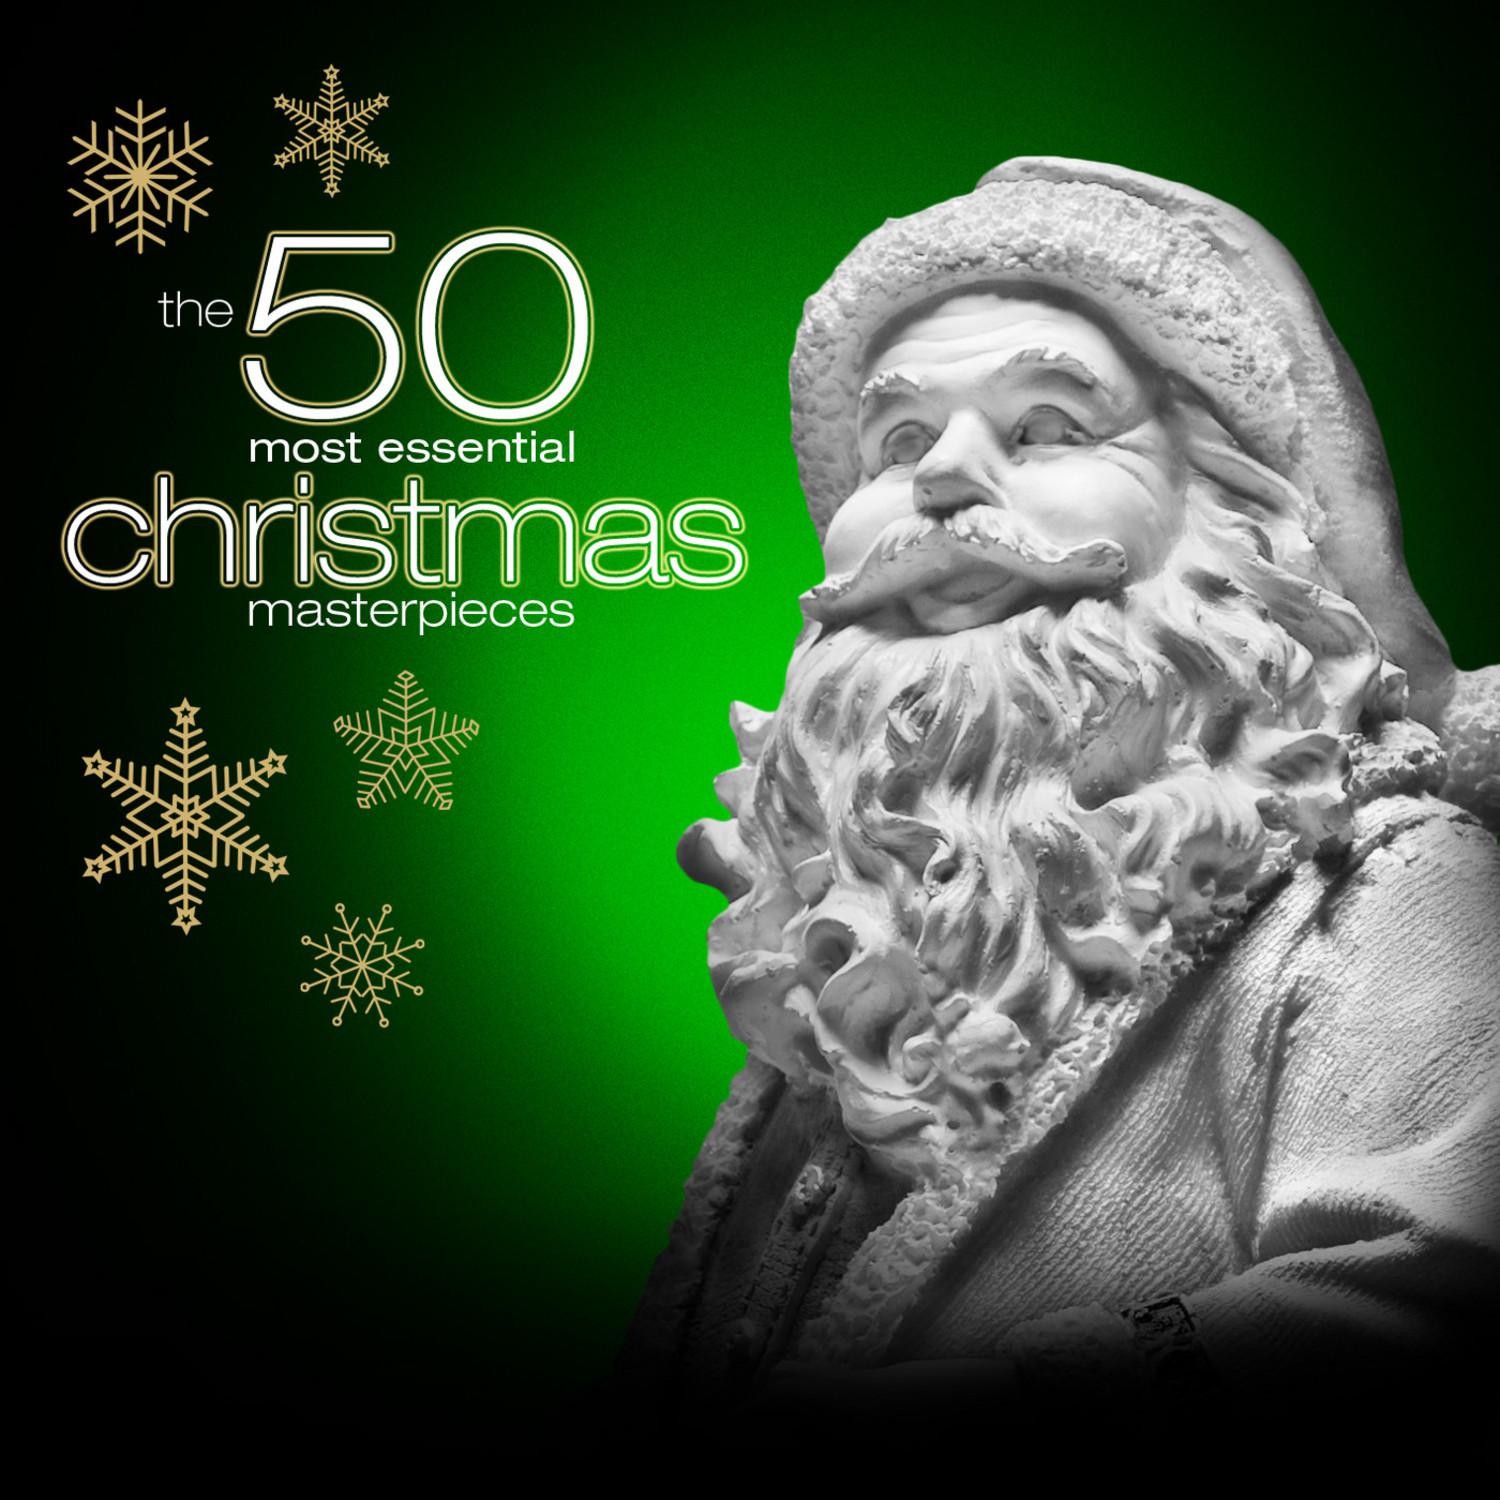 The 50 Most Essential Christmas Masterpieces